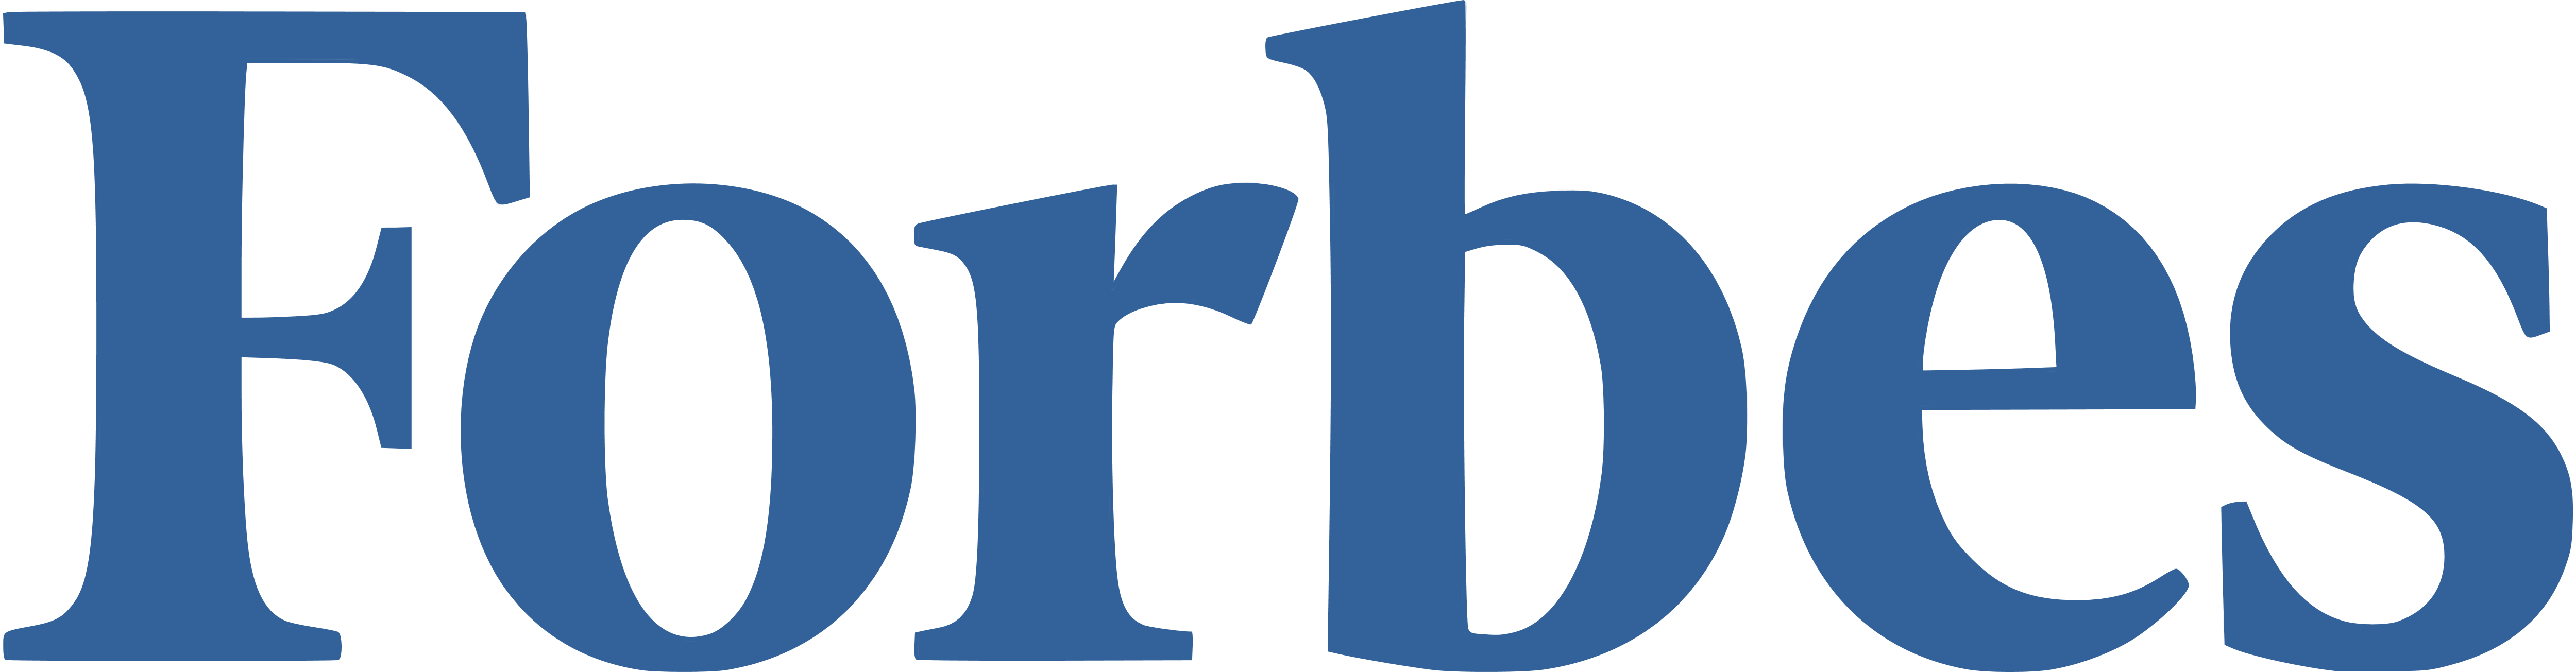 Forbes Logo - Png And Vector 